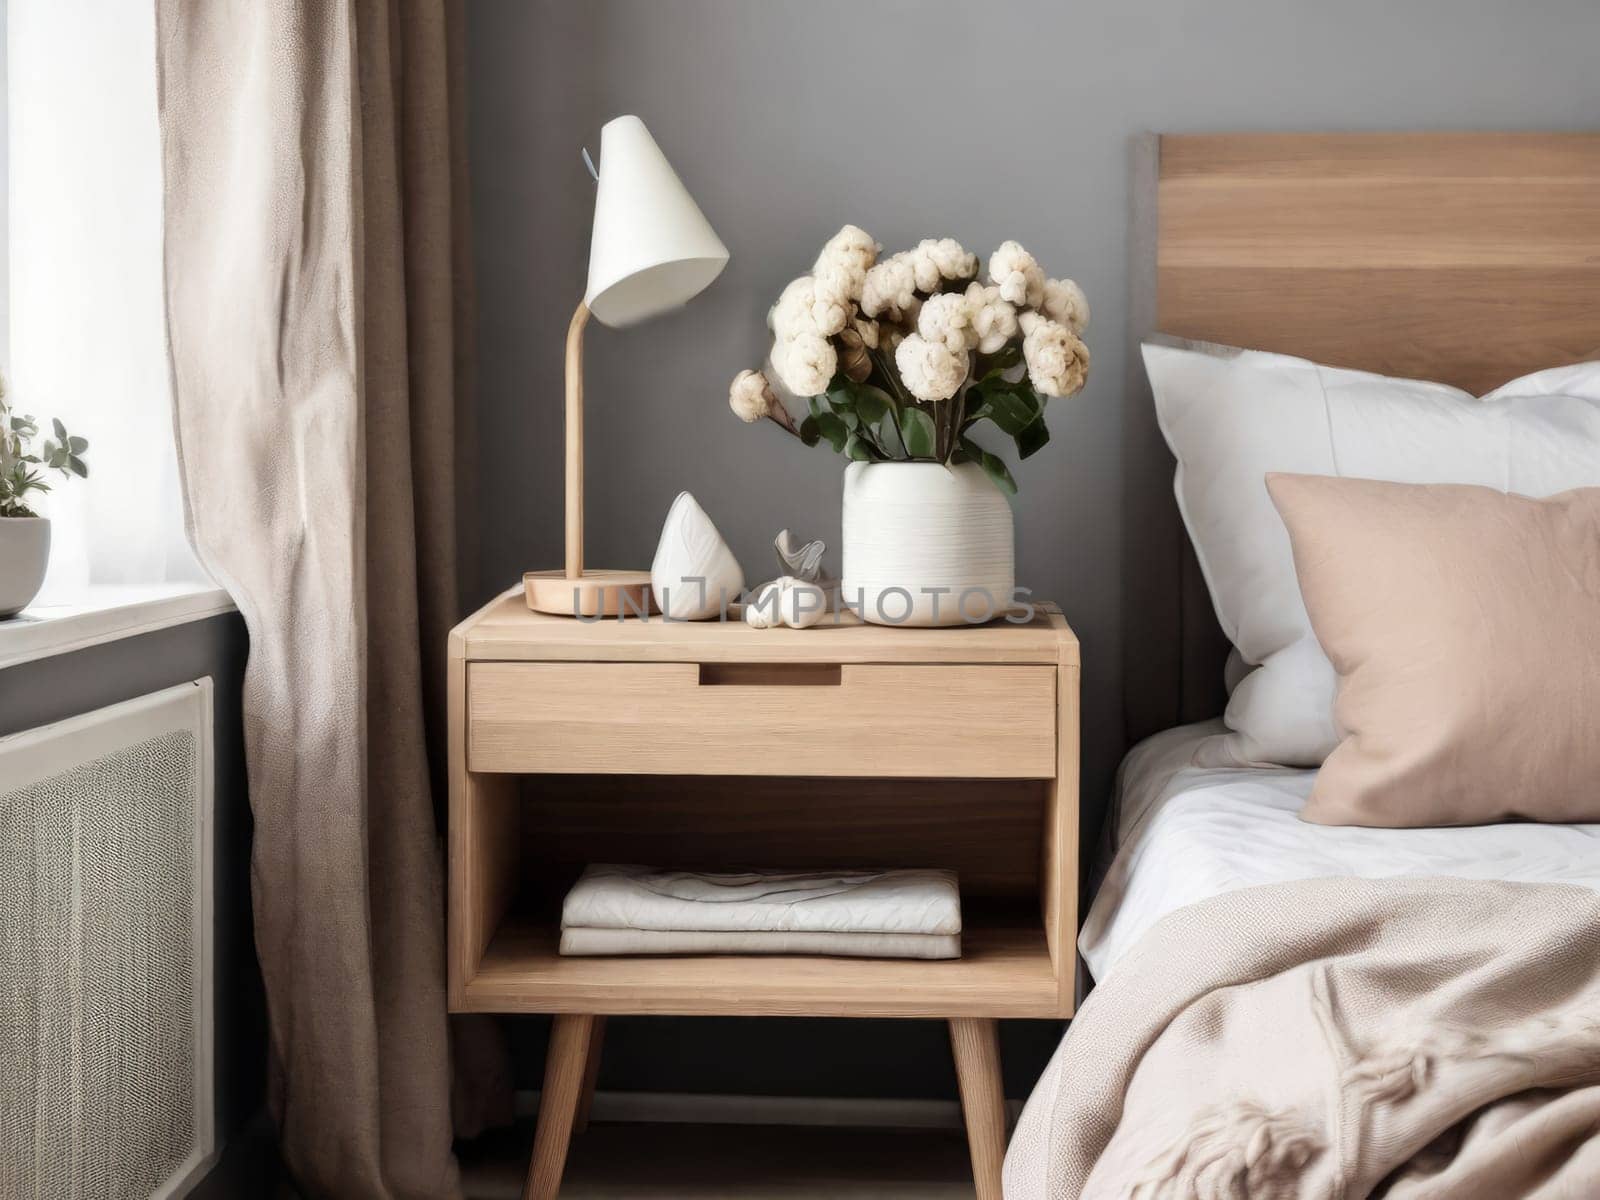 Delicate bedside decor with a lamp and floral arrangement, exuding a calming ambiance in the Scandinavian-style bedroom setting. by Annu1tochka